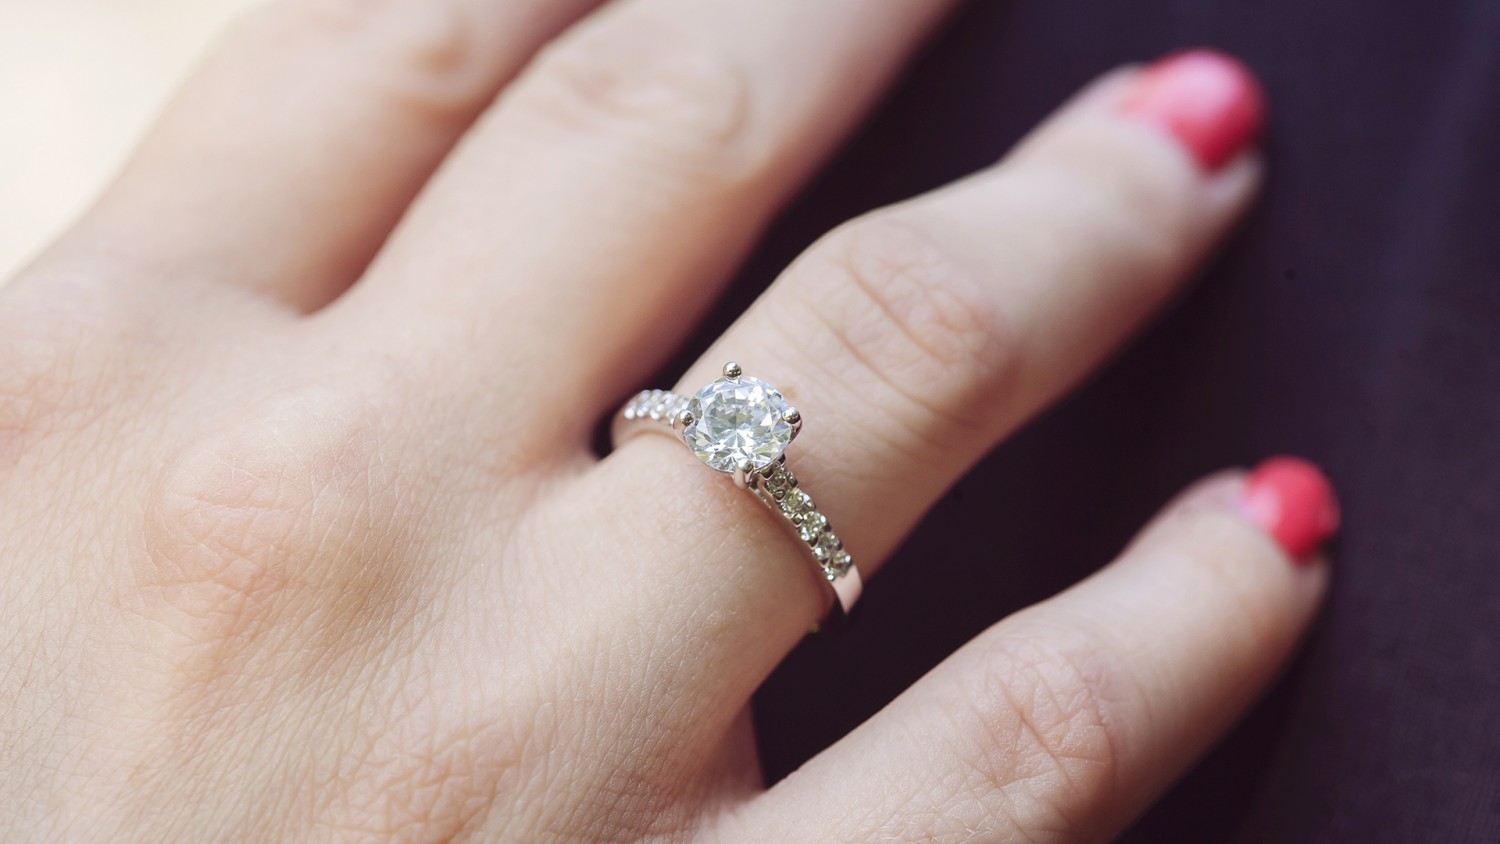 Engagement Ring vs Wedding Ring: Meaning, Symbolism, and More